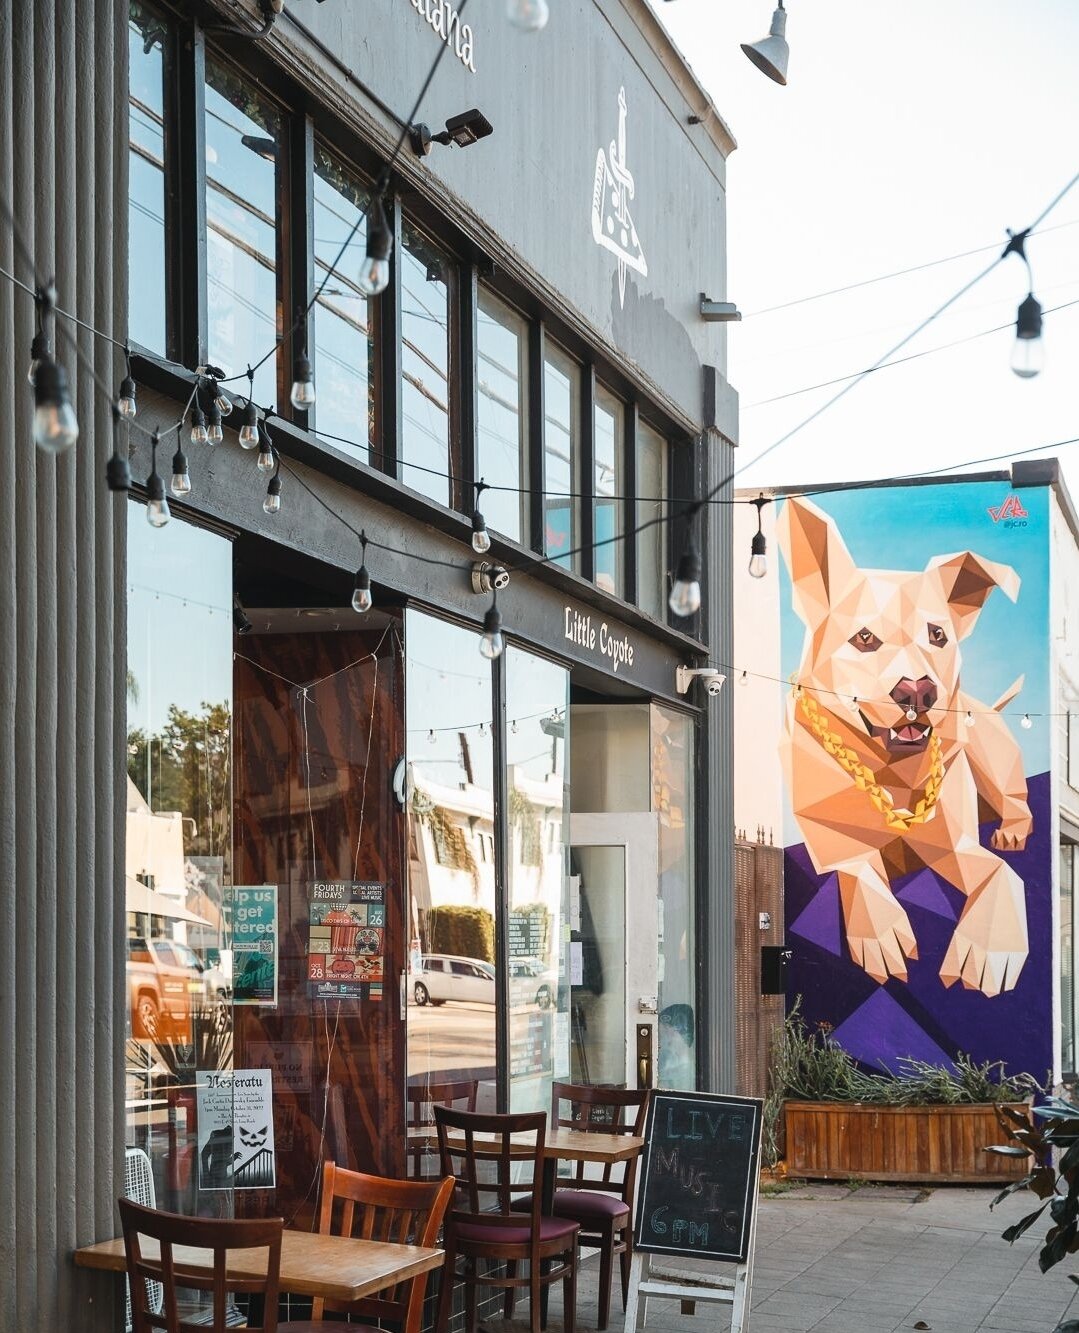 Have you spotted this mural on #4thstreetlb next to @littlecoyotelbc? 🎨 SWIPE to see the artist and muse. 😉 🐶⁠
⁠
Come find this mural by @jc.ro ⁠before it's gone! In just a couple of months it will be replaced by a new art piece from another artis